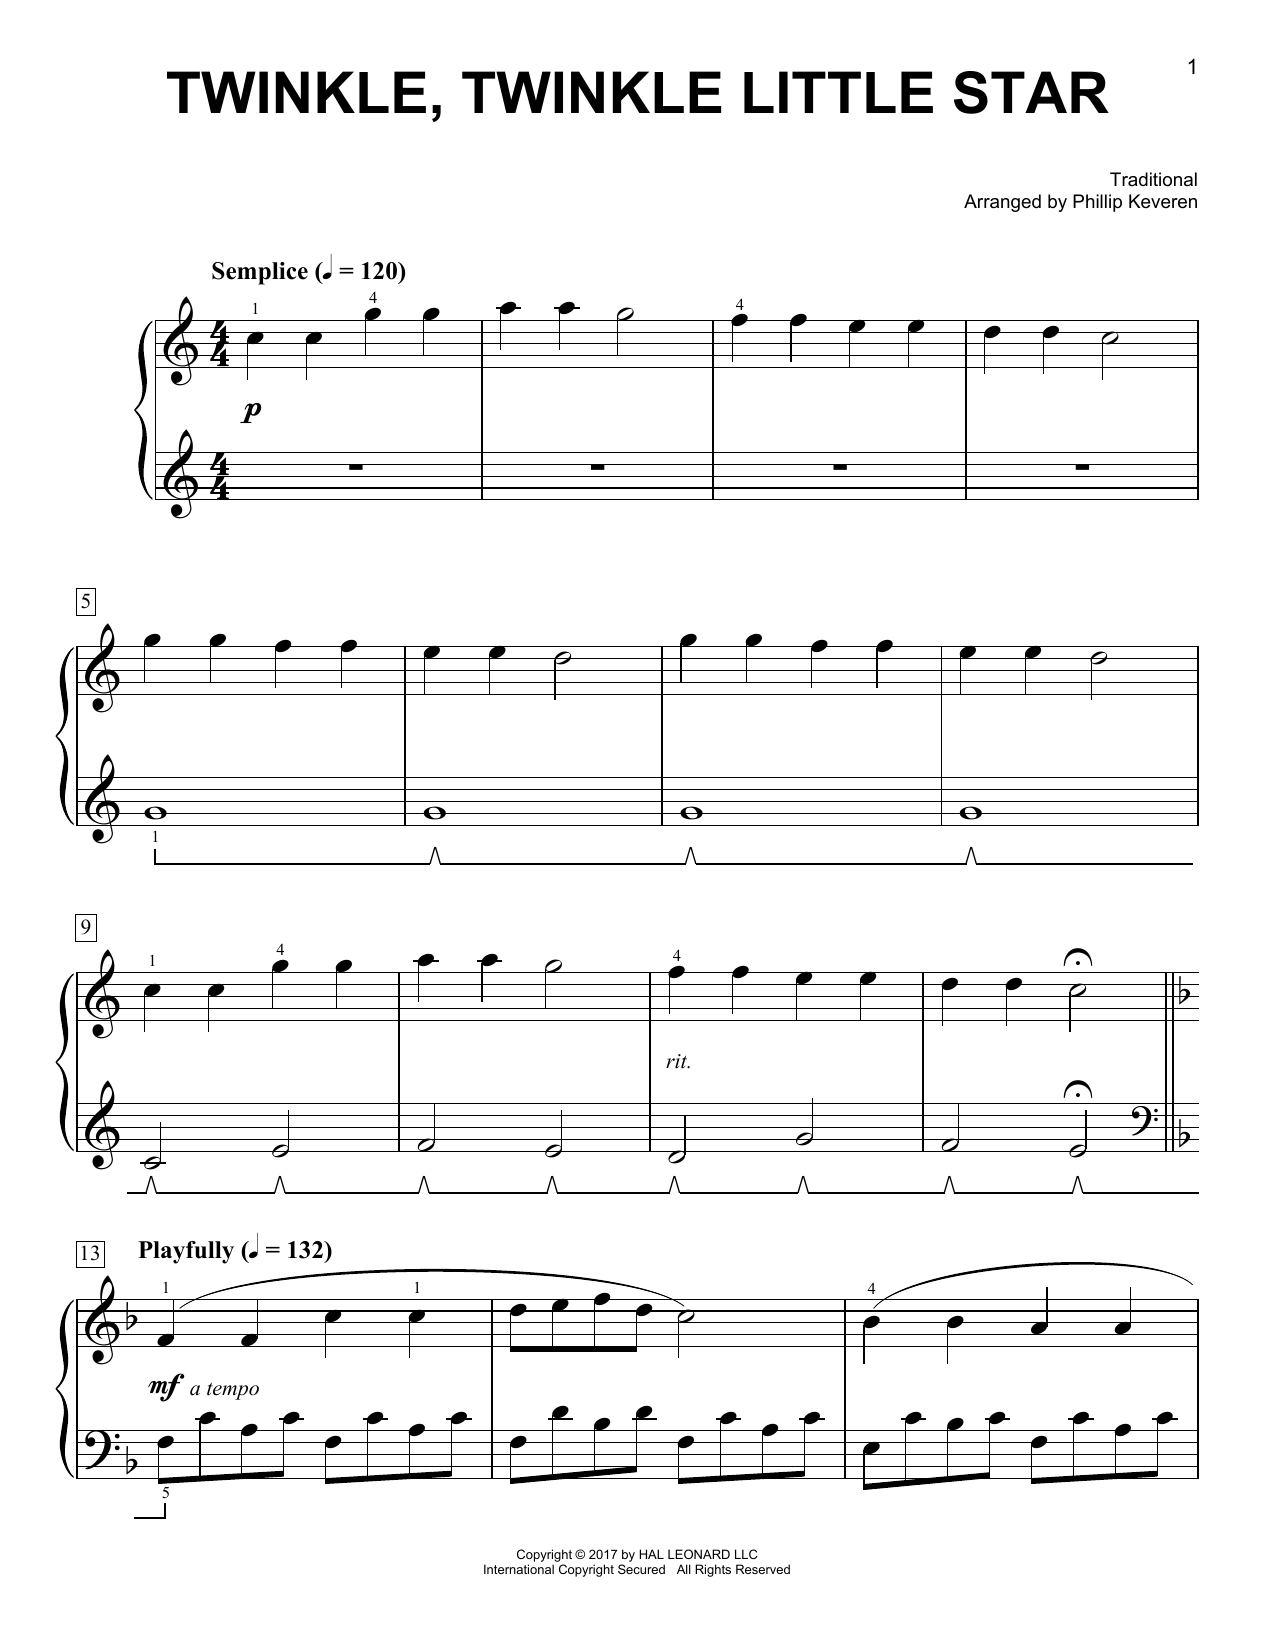 Twinkle, Twinkle Little Star [Classical version] (arr. Phillip Keveren)  Sheet Music by Traditional, Easy Piano